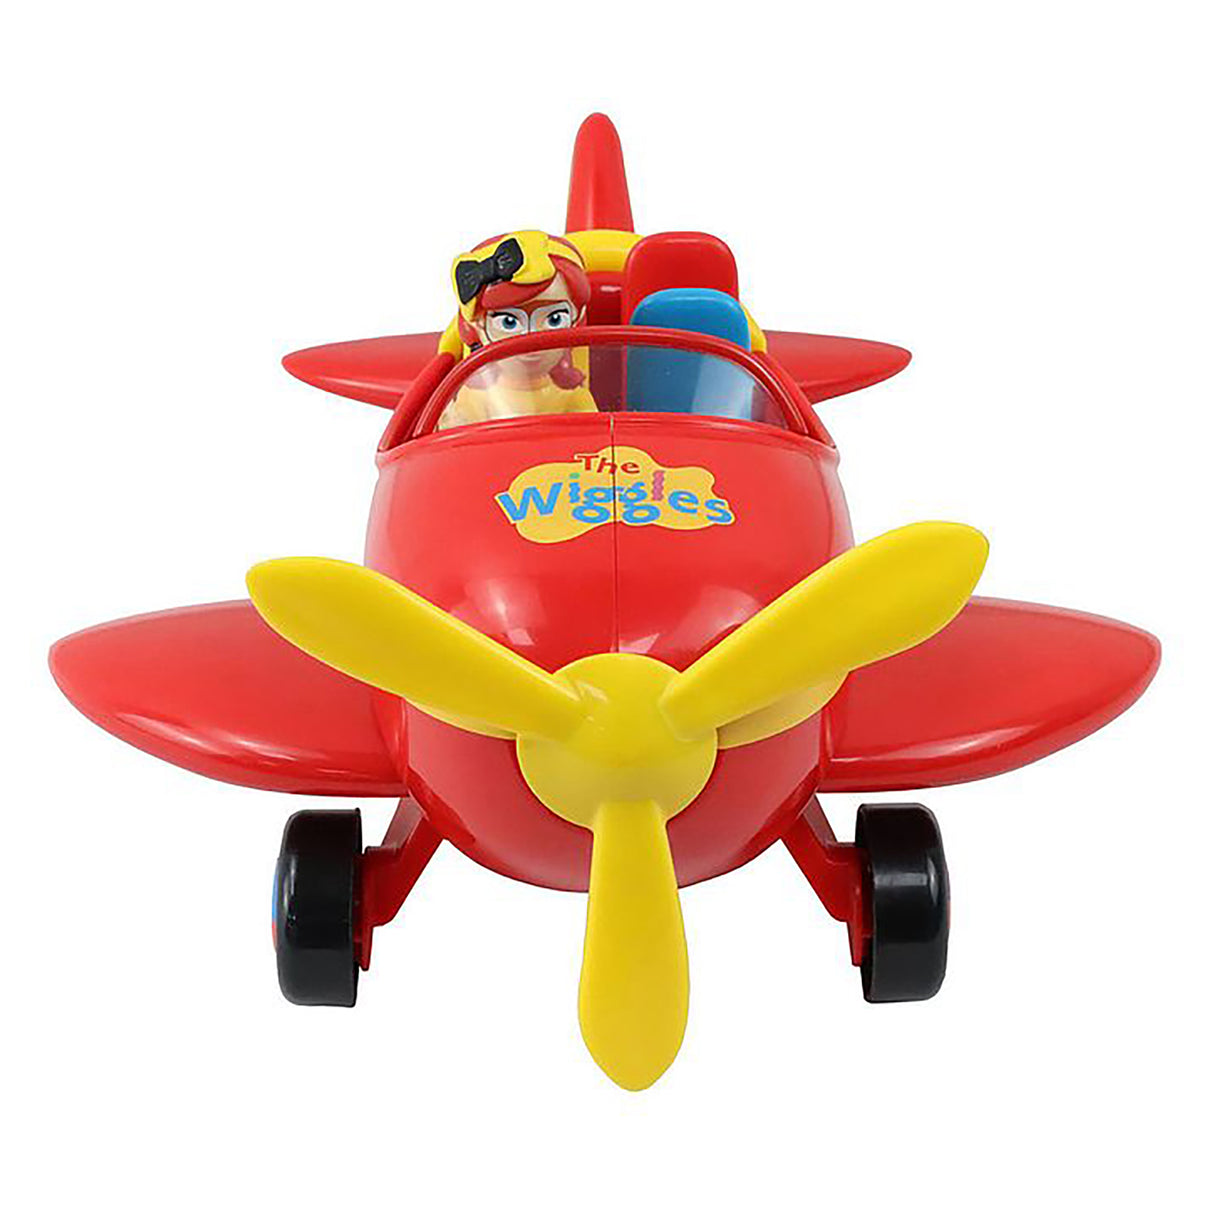 The Wiggles Plane - The Big Red Plane